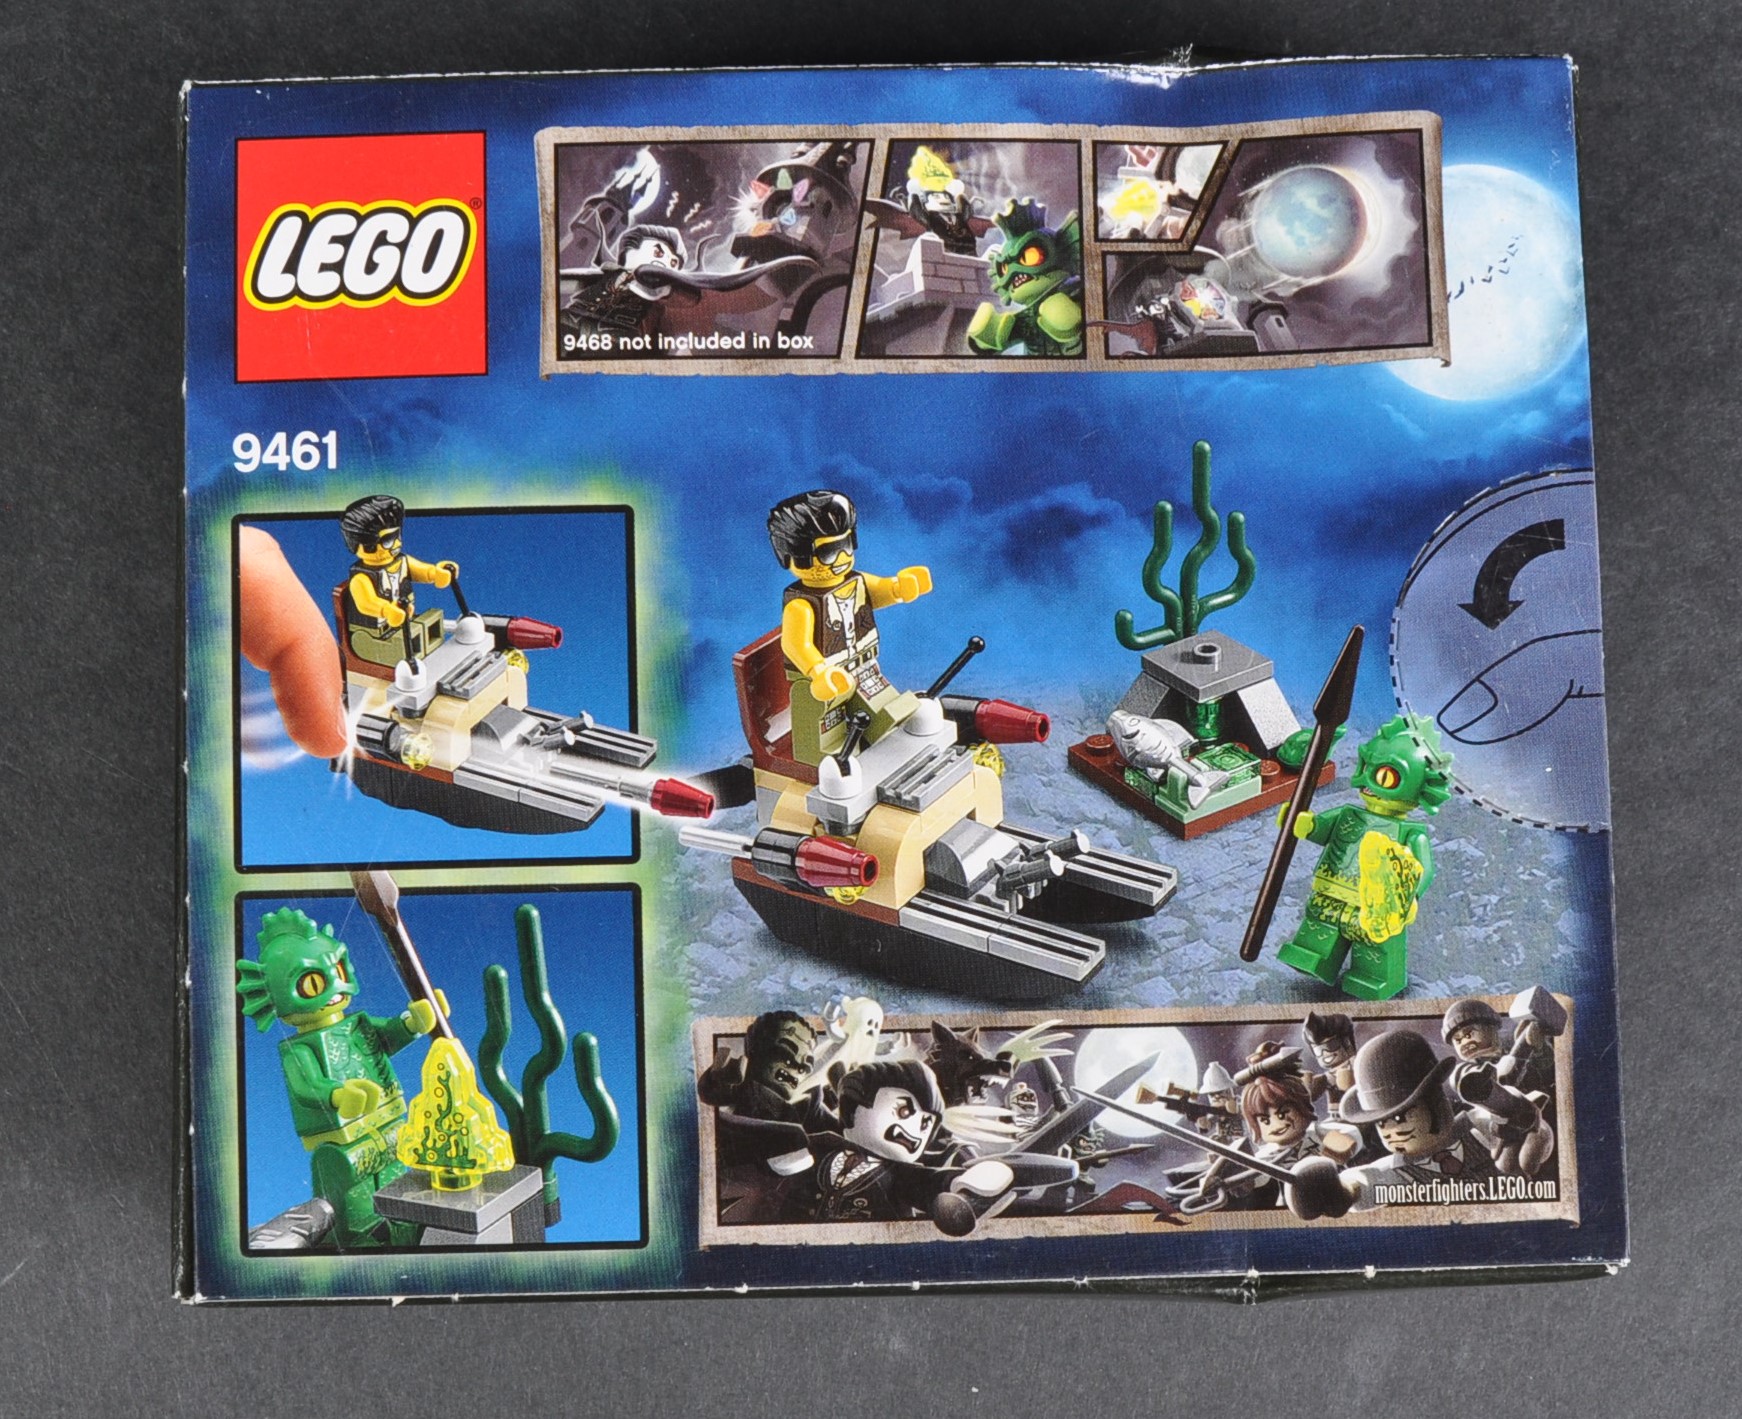 LEGO SETS - MONSTER FIGHTERS - 9461 - THE SWAMP CREATURE - Image 10 of 10